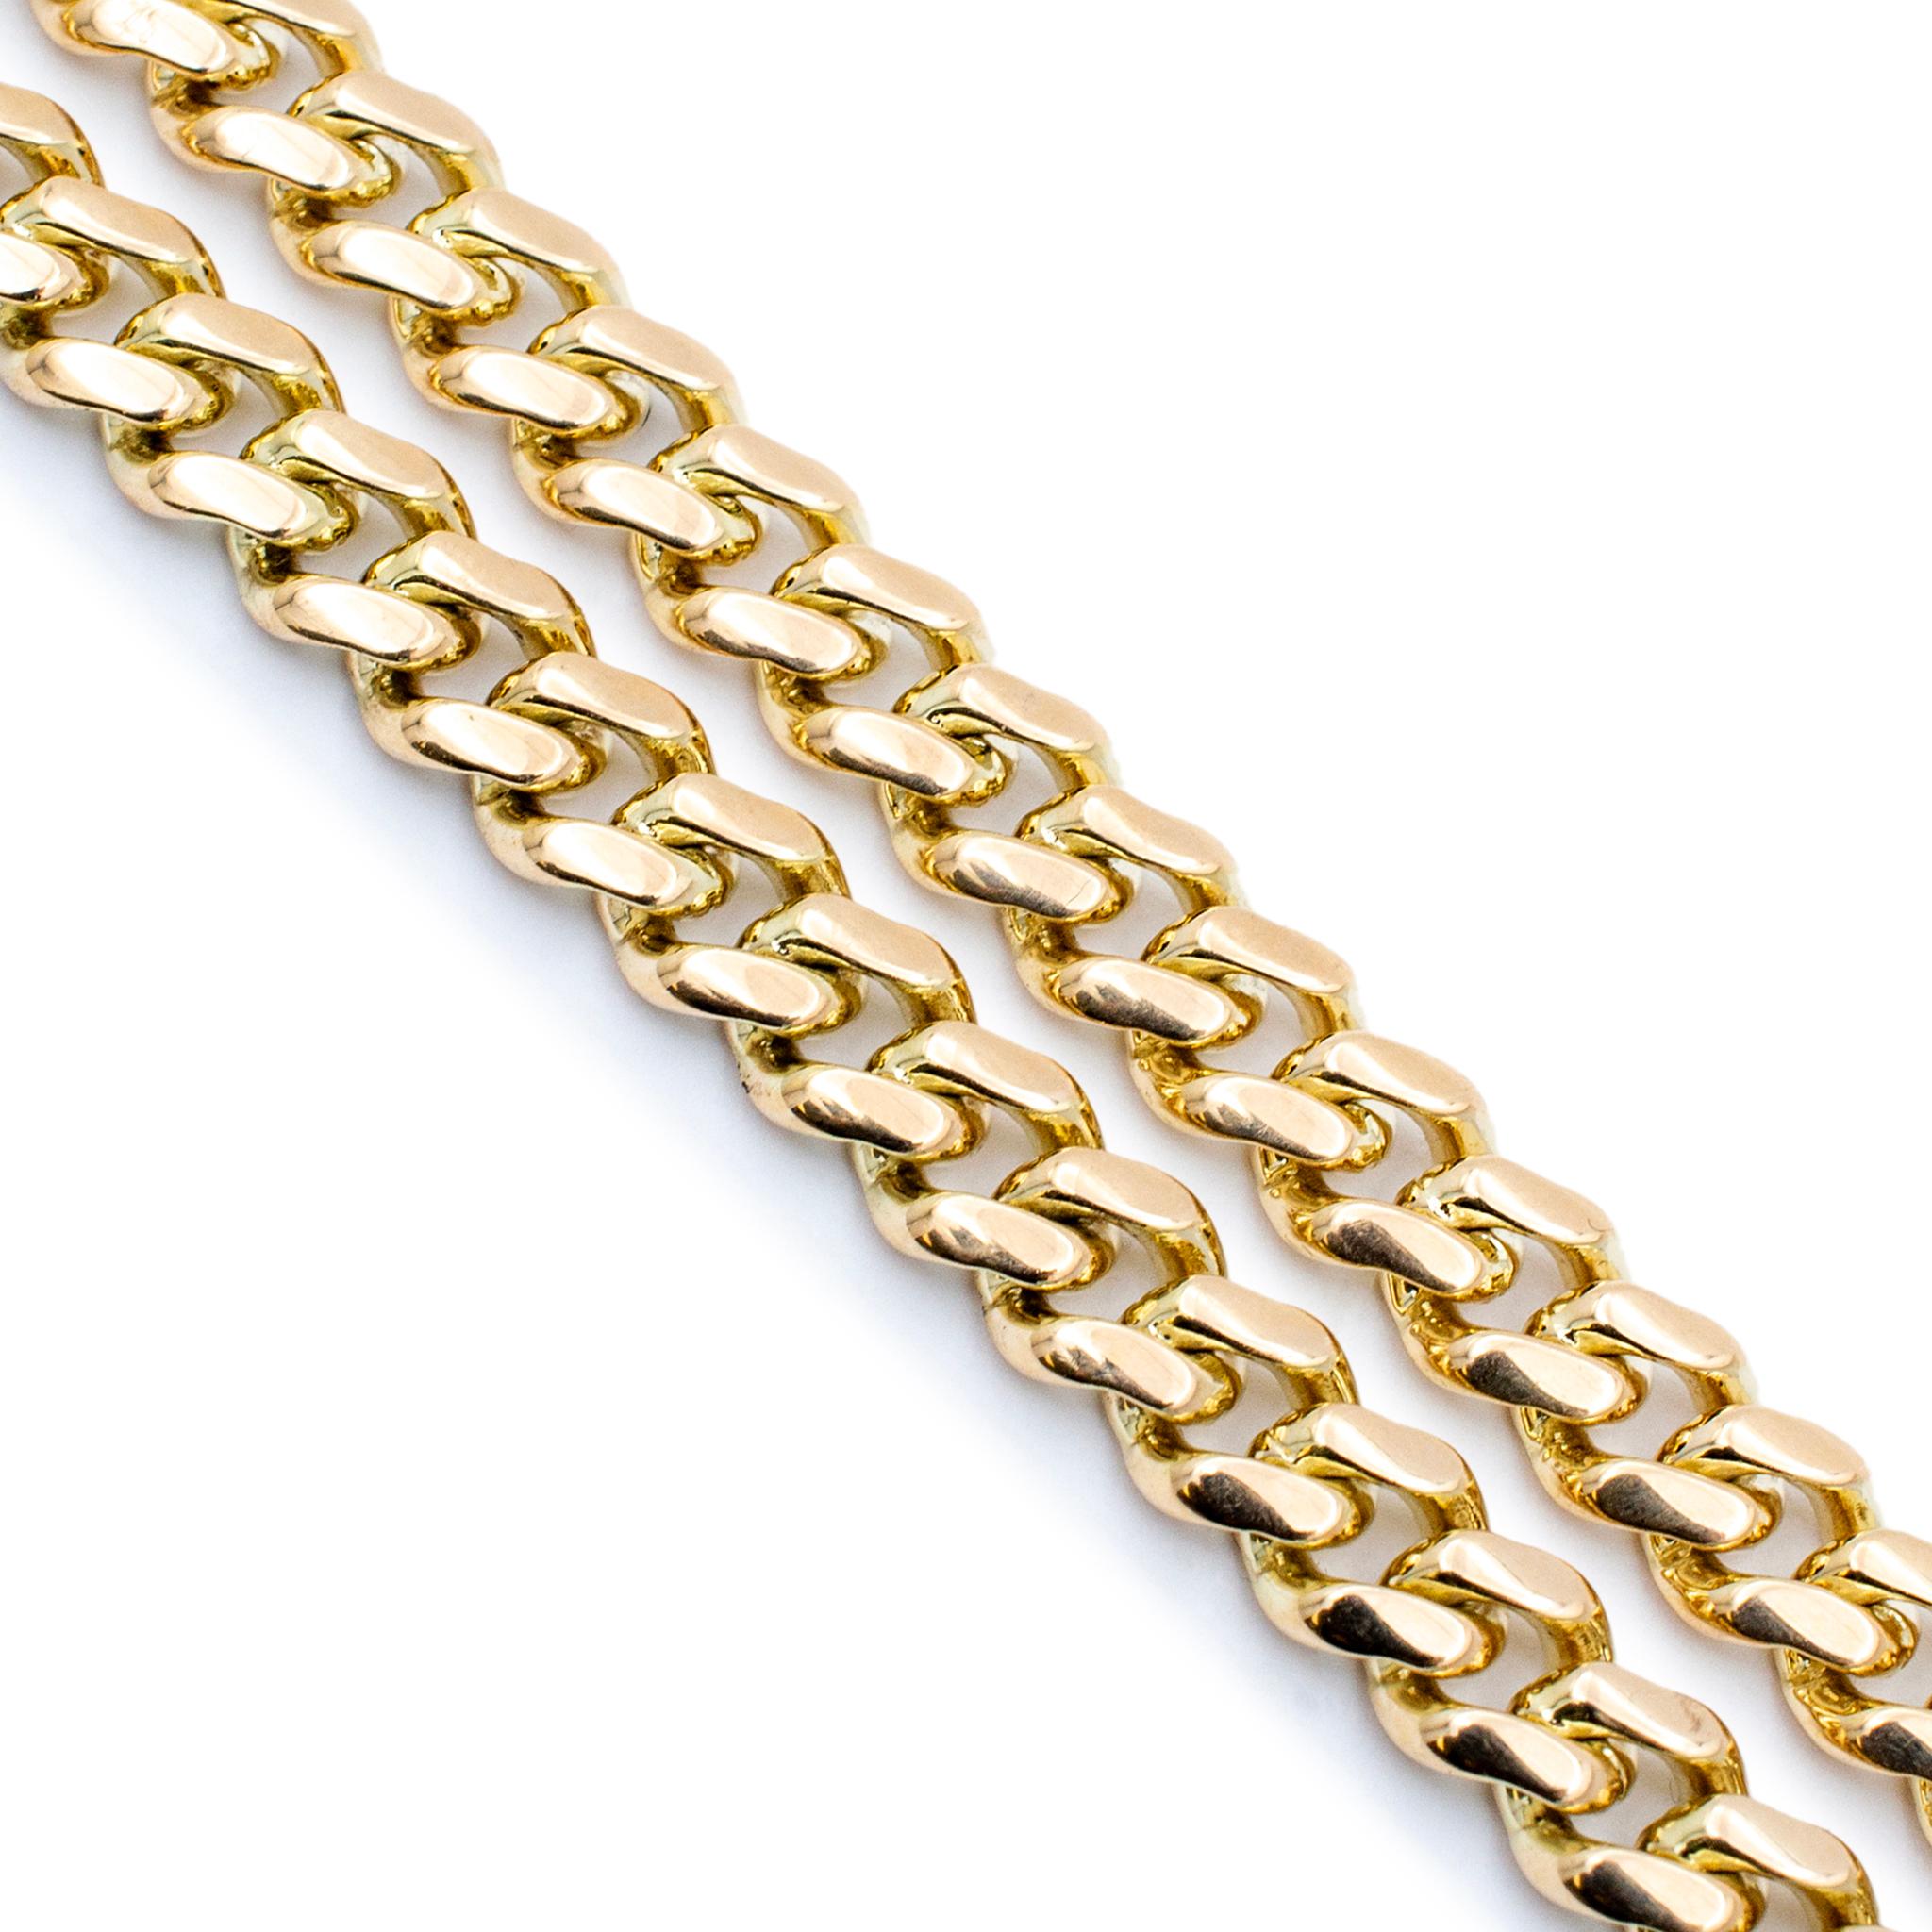 Gender: Ladies

Metal Type: 10K Yellow Gold

Length: 26.00 inches

Width: 7.50 mm

Total weight: 94.10 grams

10K yellow gold cuban link chain.Engraved with 